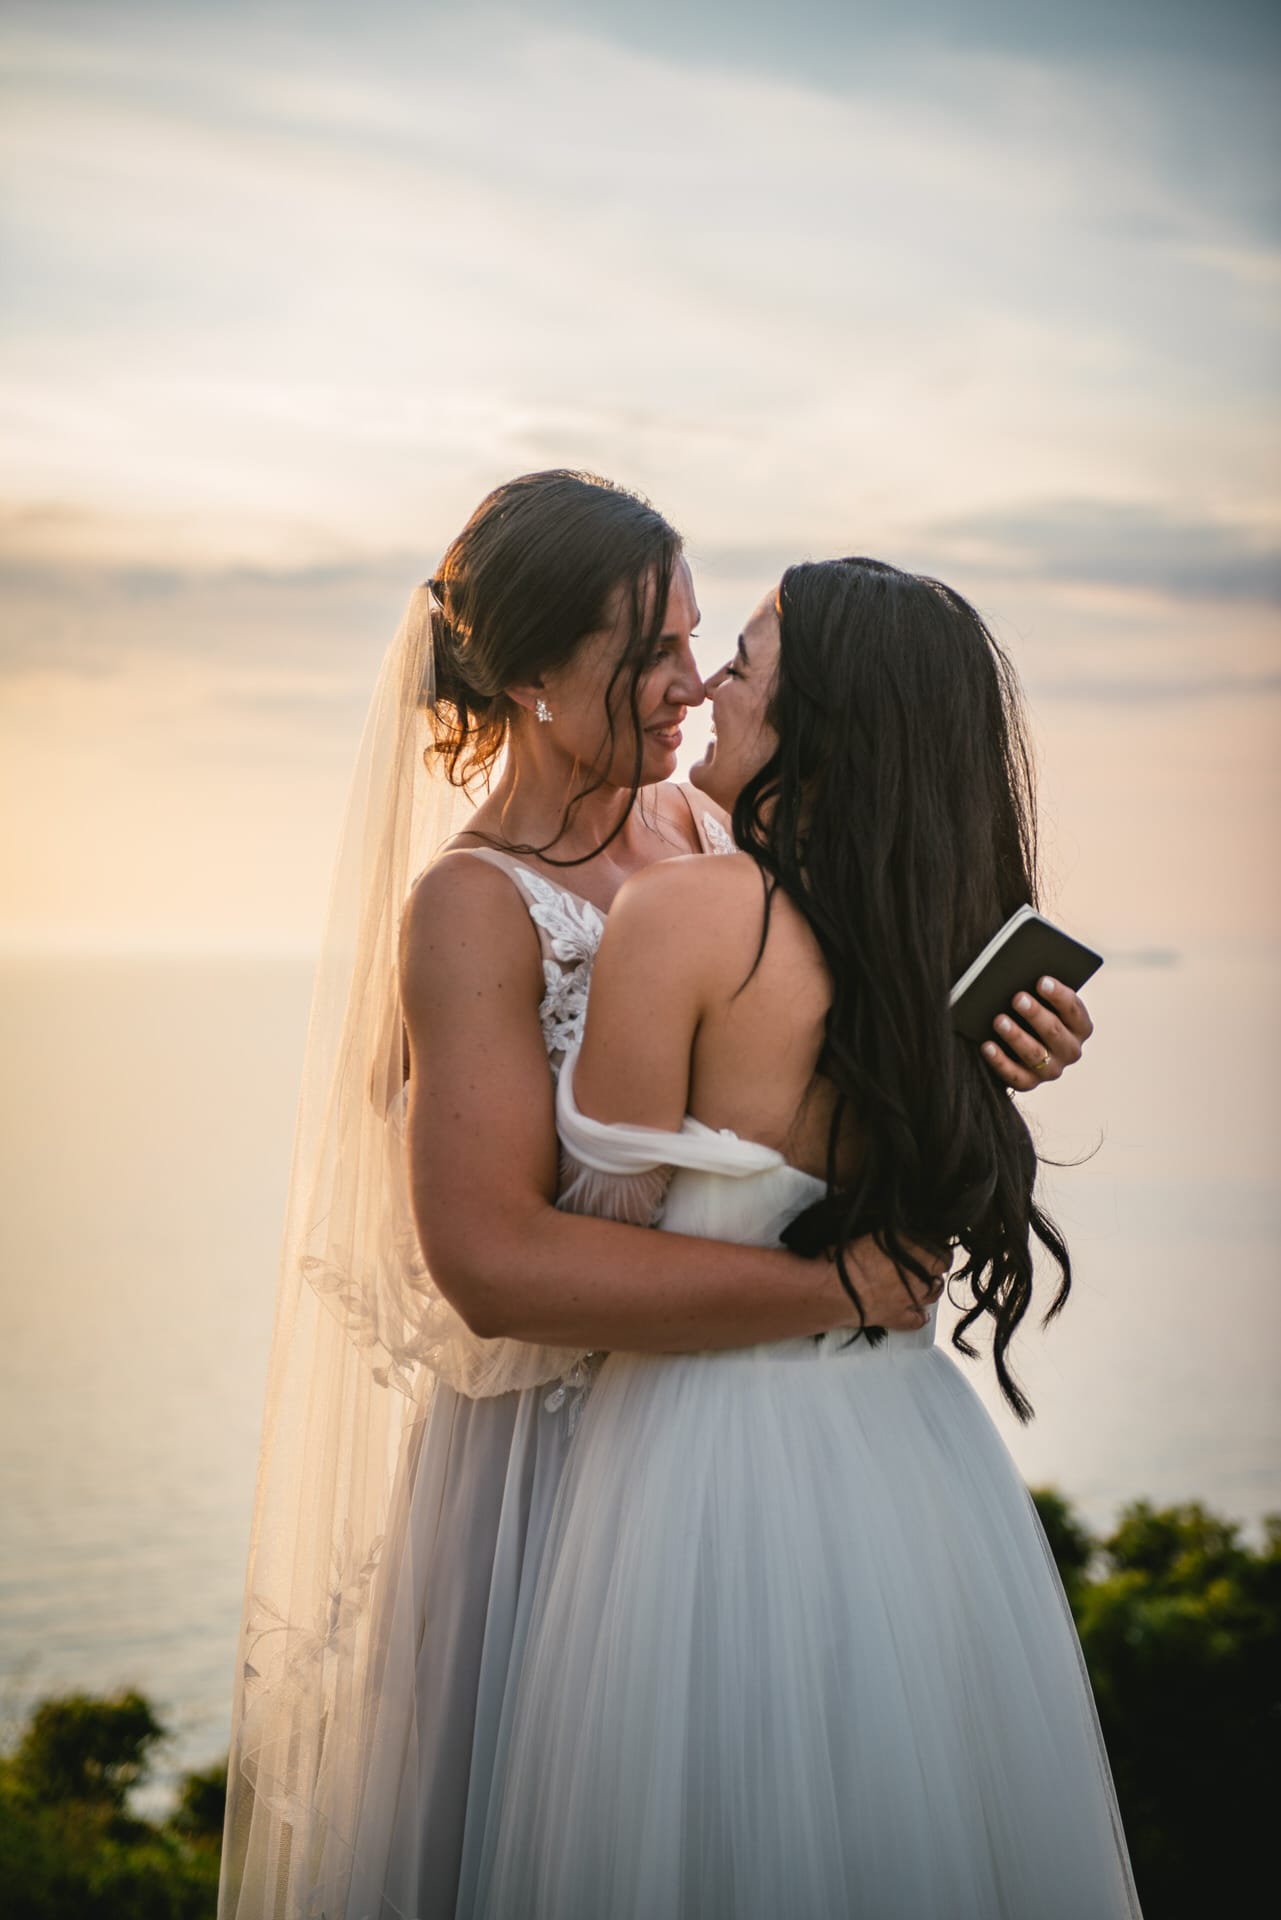 A heartfelt exchange of vows under the Corfu sun during their ceremony.